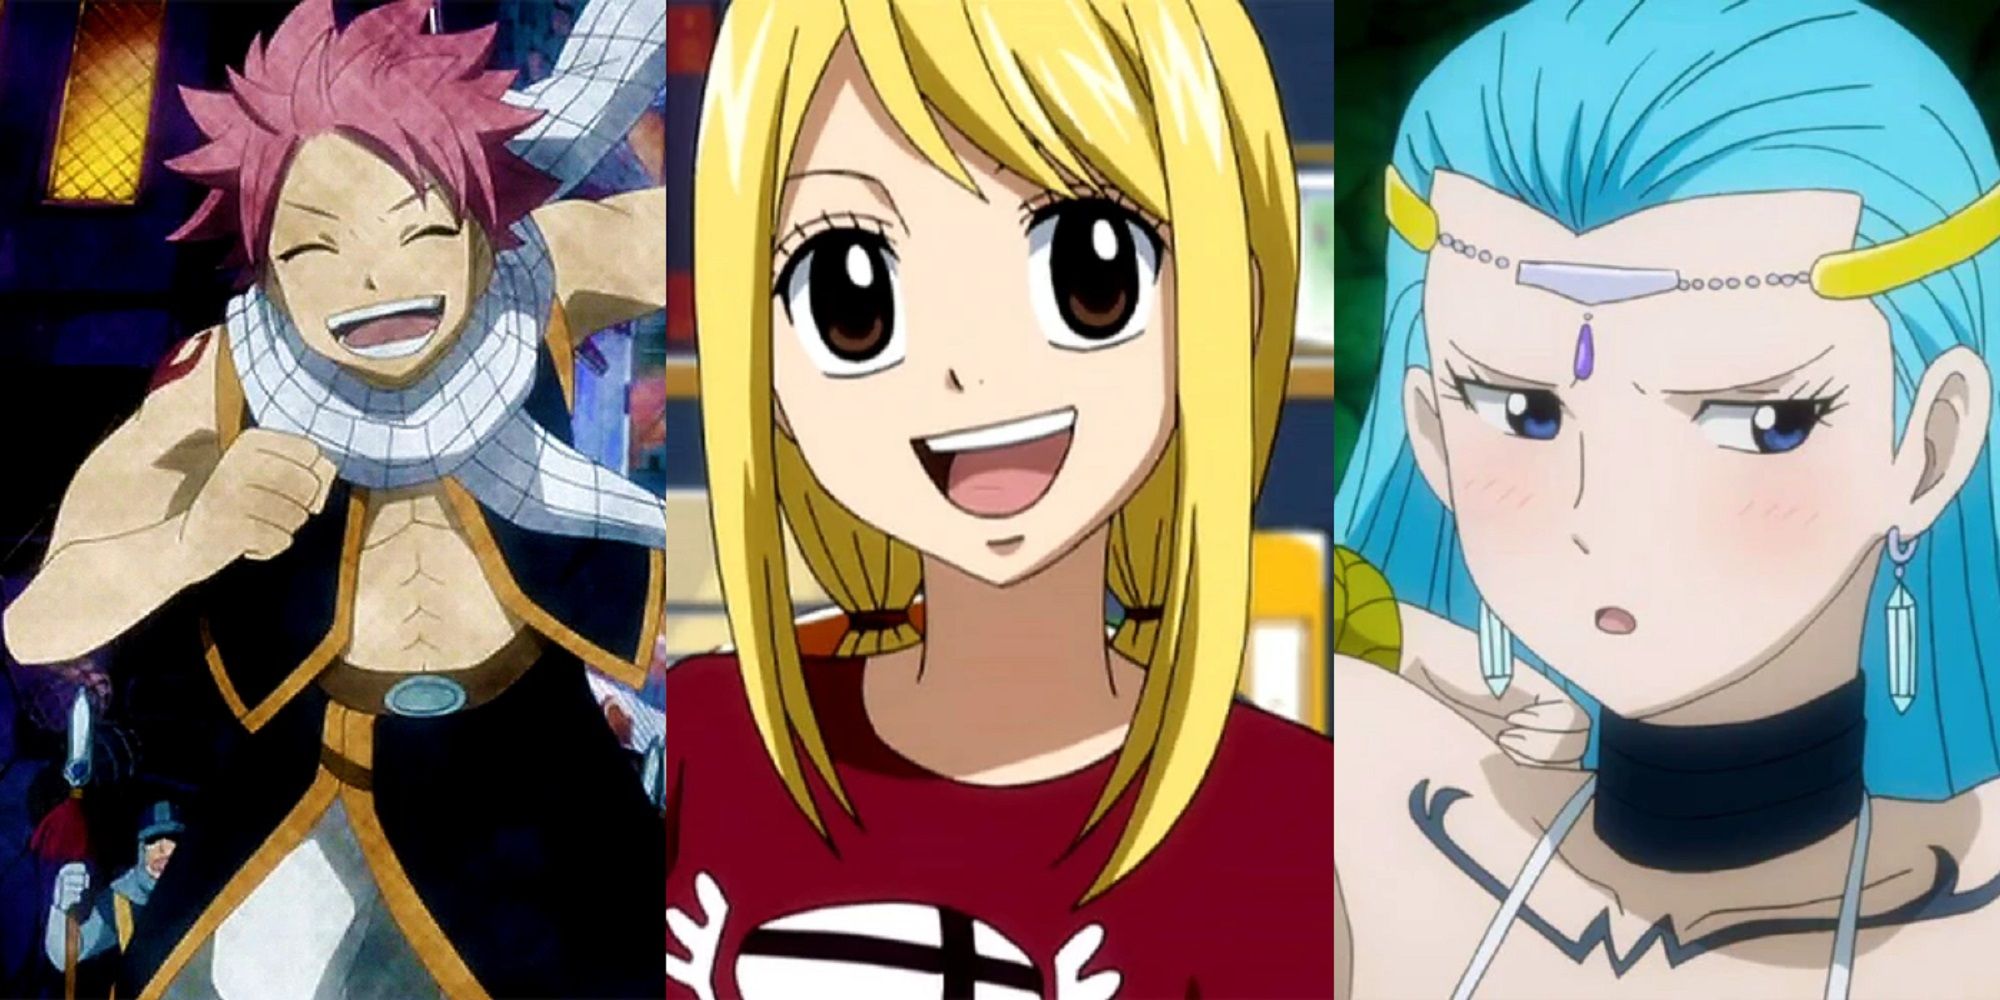 Split image of a smiling Natsu Dragneel running away, a grinning Lucy Heartfilia, and an embarassed Aquarius from the Fairy Tail series